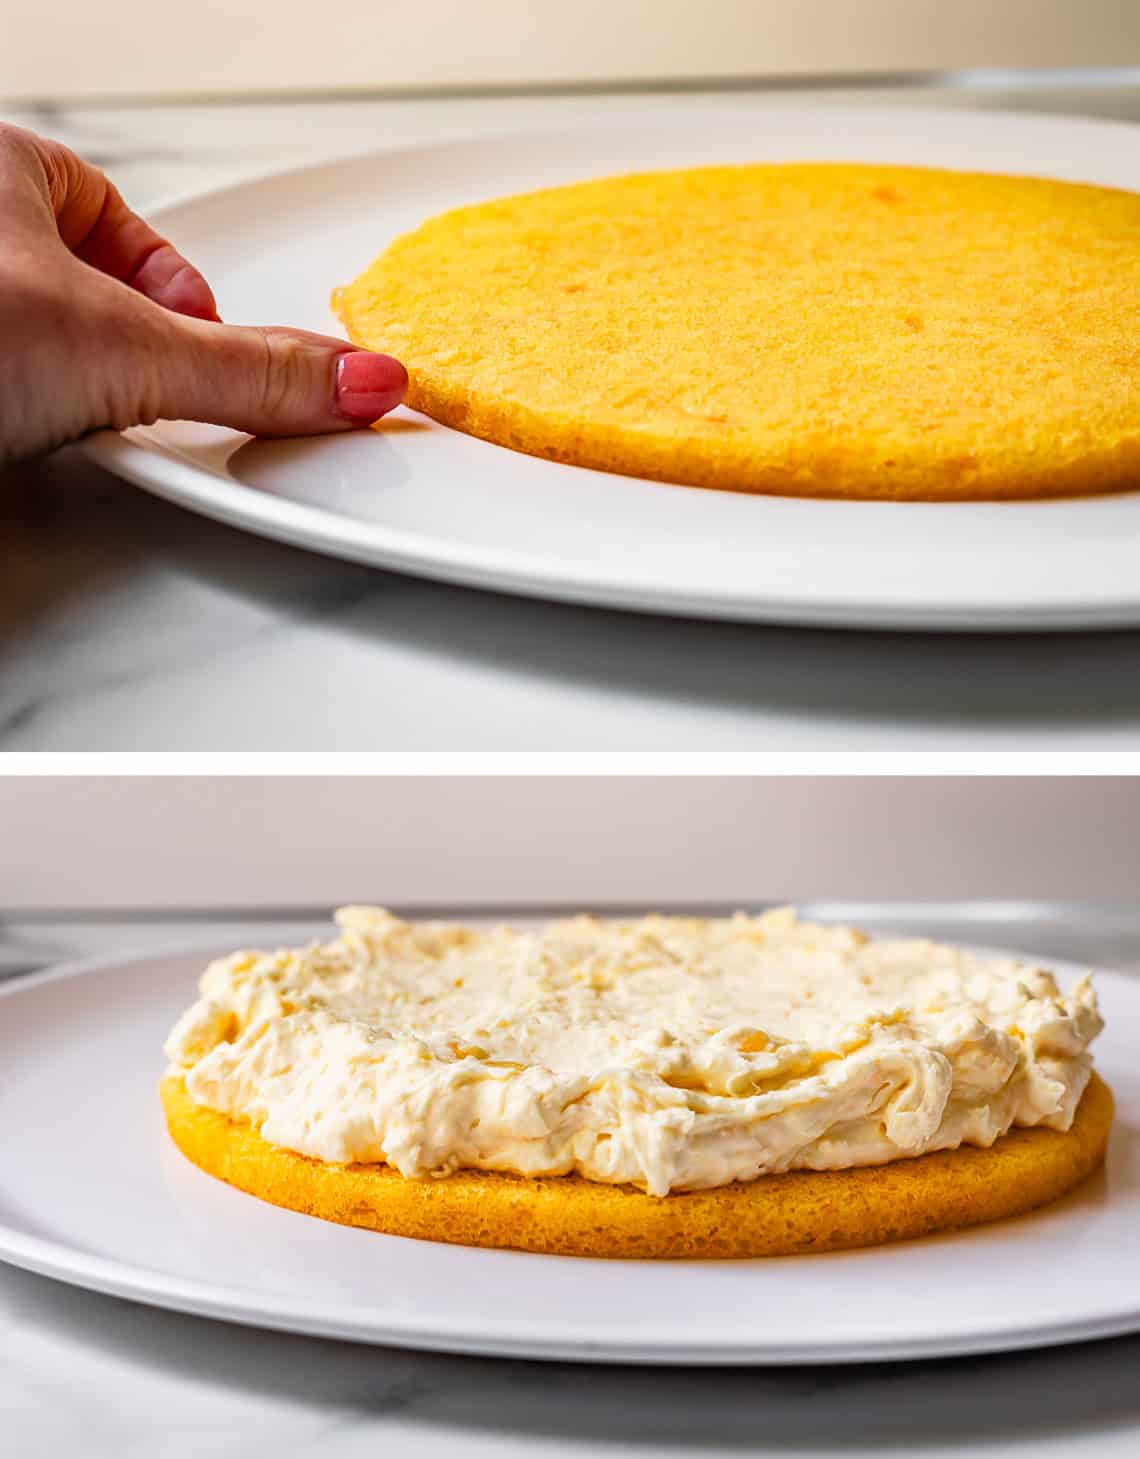 top very thin cake layer on plate with thumb, bottom layer of pineapple whipped cream on the cake.